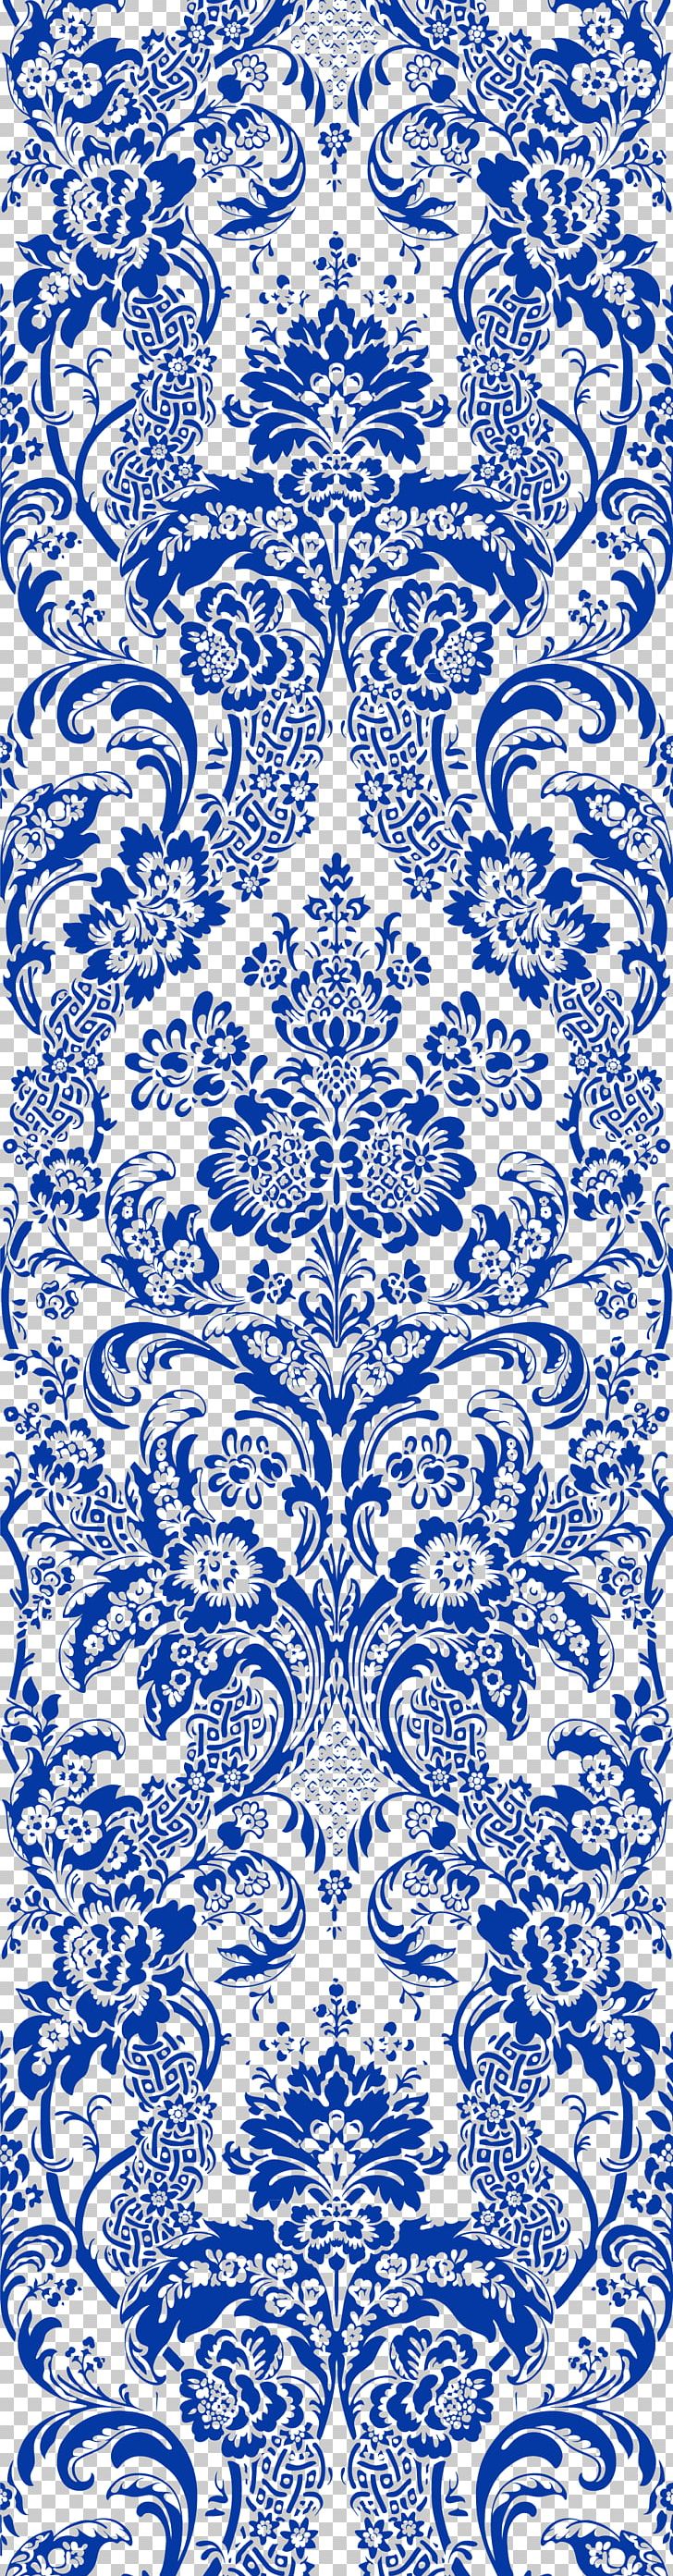 Huadi Blue And White Pottery Moutan Peony PNG, Clipart, Blue, China, Chinese Style, Encapsulated Postscript, Geometric Pattern Free PNG Download